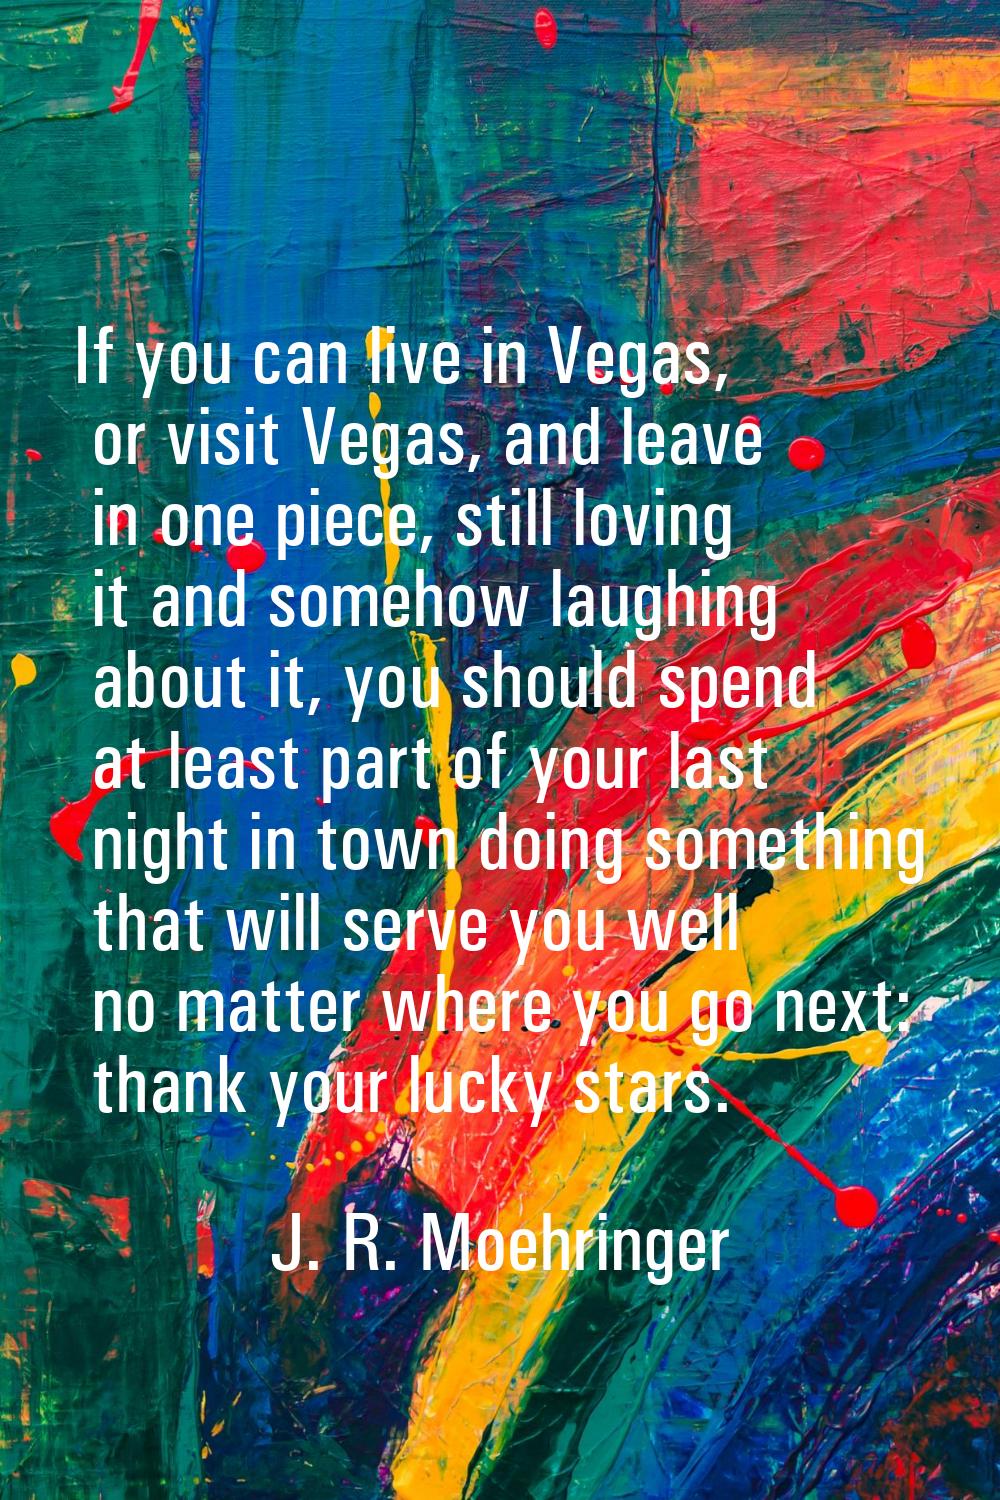 If you can live in Vegas, or visit Vegas, and leave in one piece, still loving it and somehow laugh